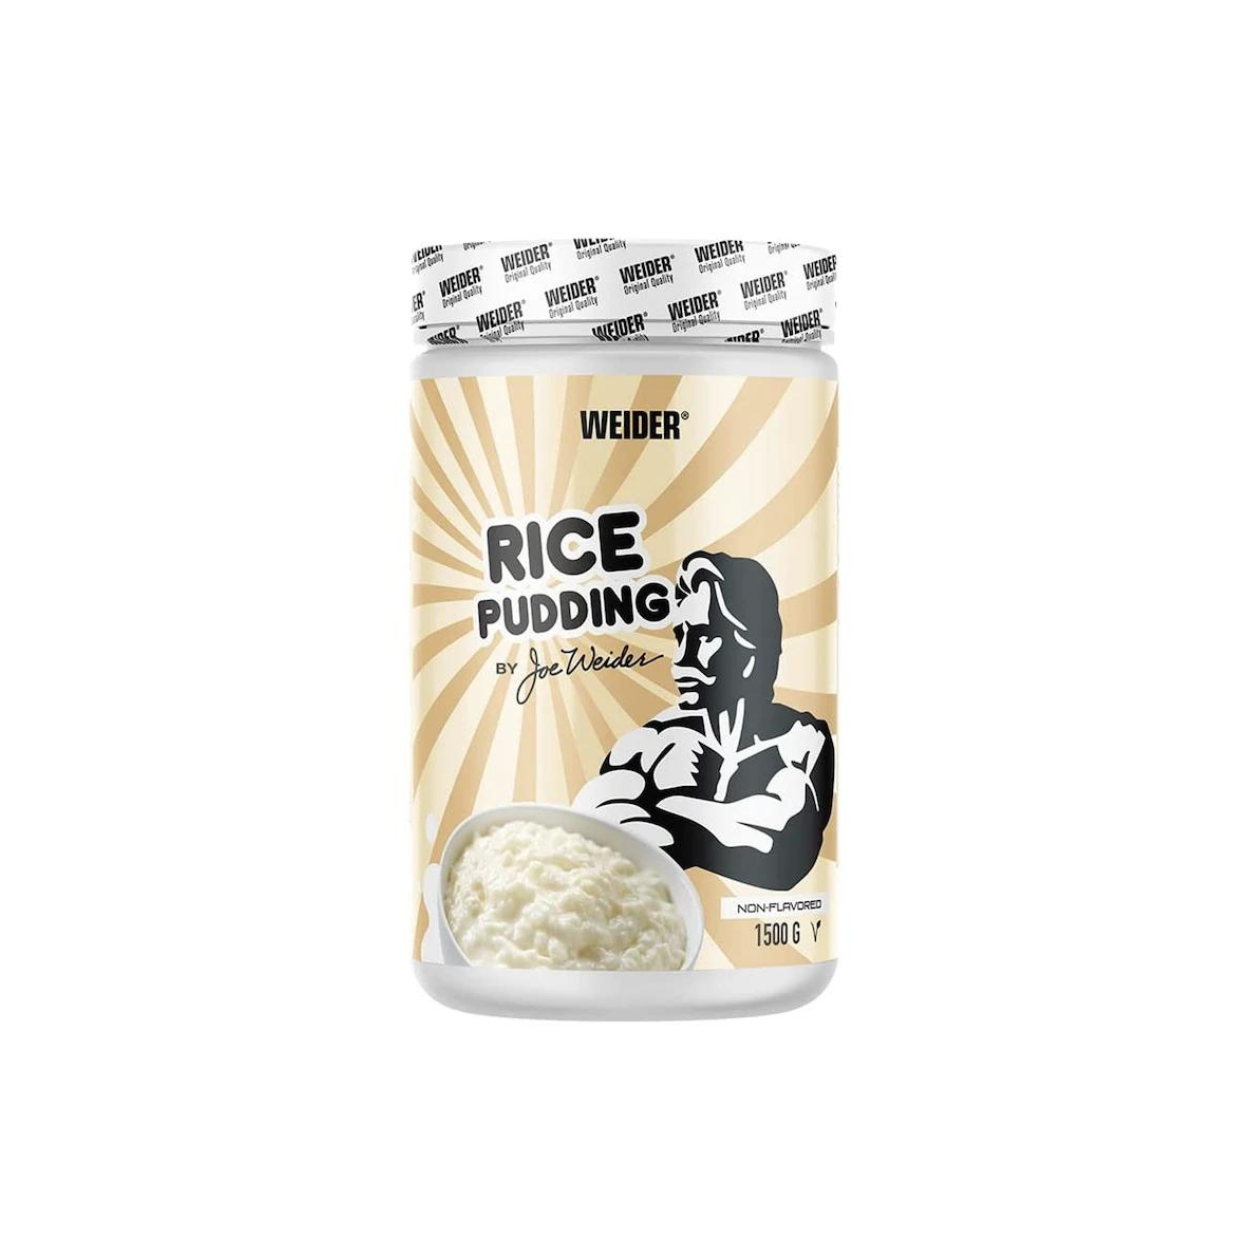 Weider Rice Pudding non-flavored (1500g Dose)